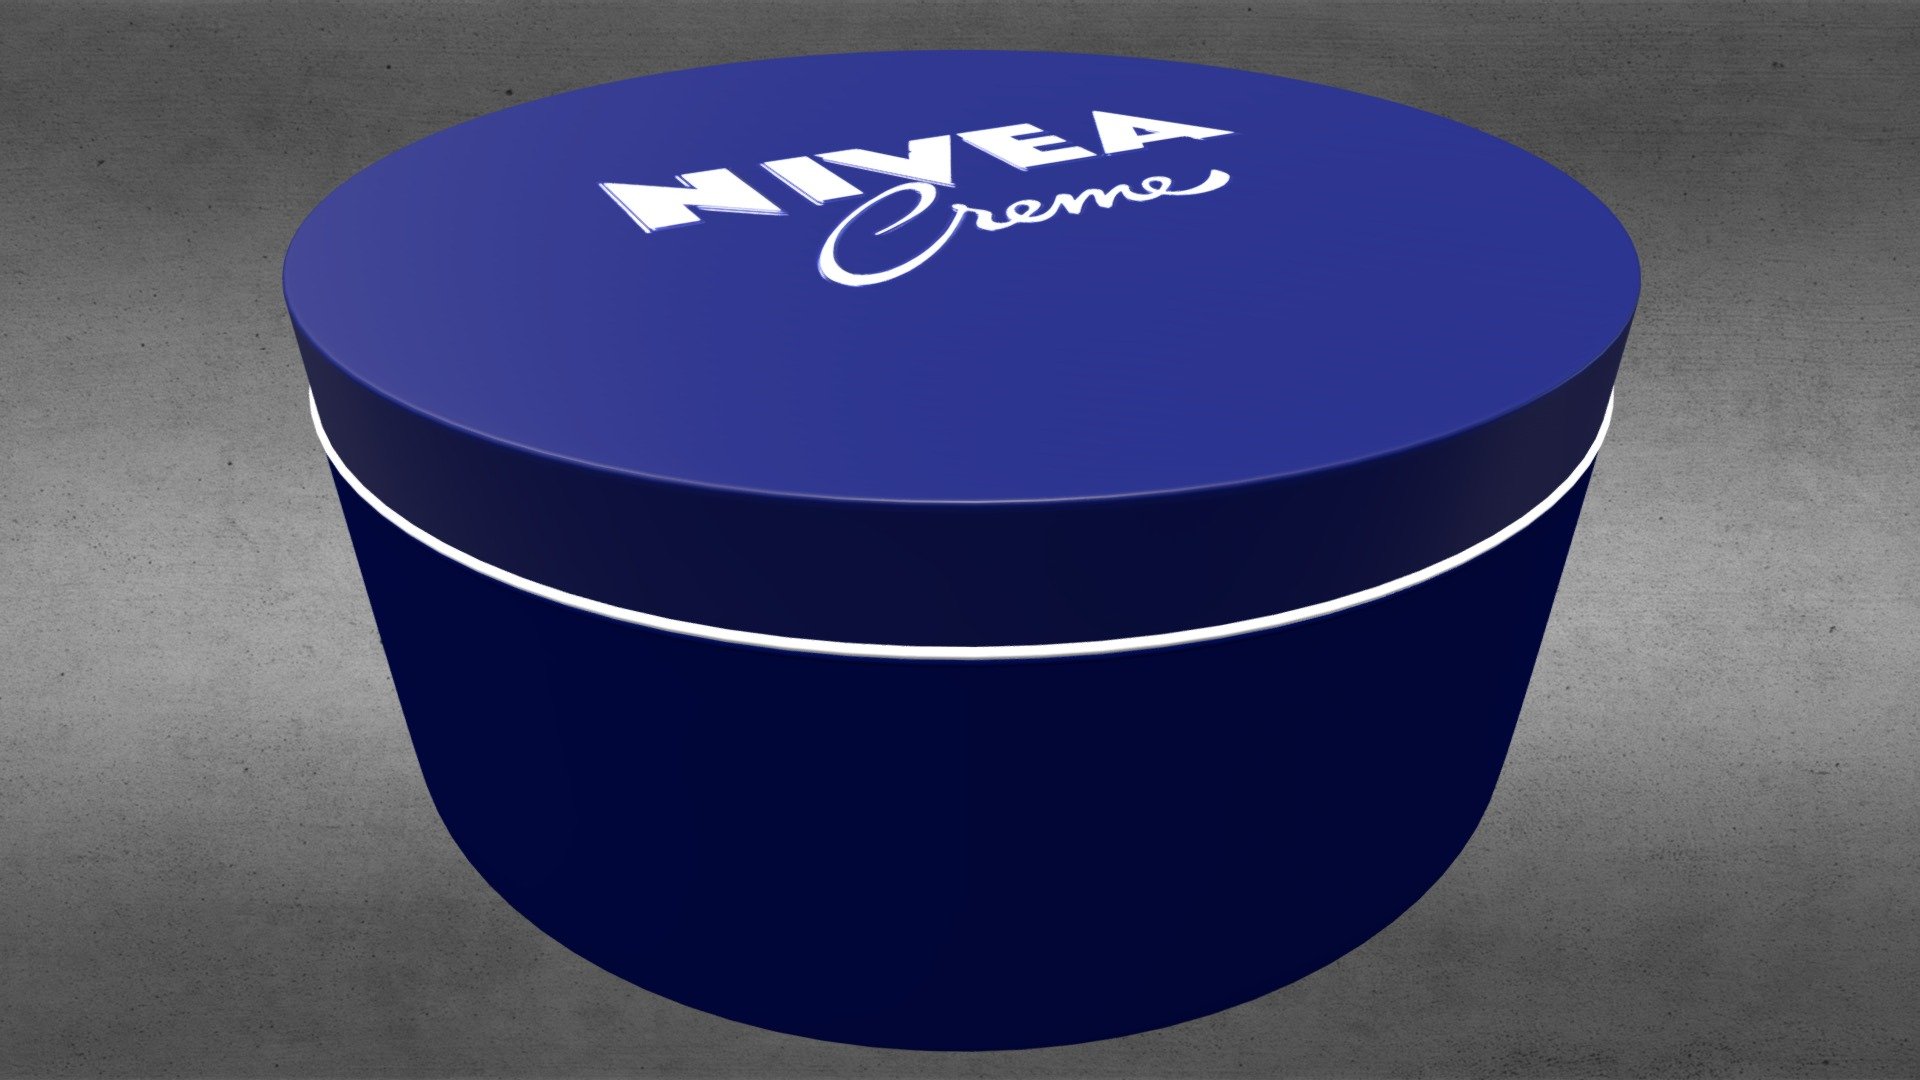 This is 3d model Nivea Creme, Originally modeled in 3ds max 2011

File 3ds Max 2011 ready to render with Mental Ray

Polygons: 2136
Vertices: 2117 - Nivea Creme 3d model - 3D model by nuralam018 3d model